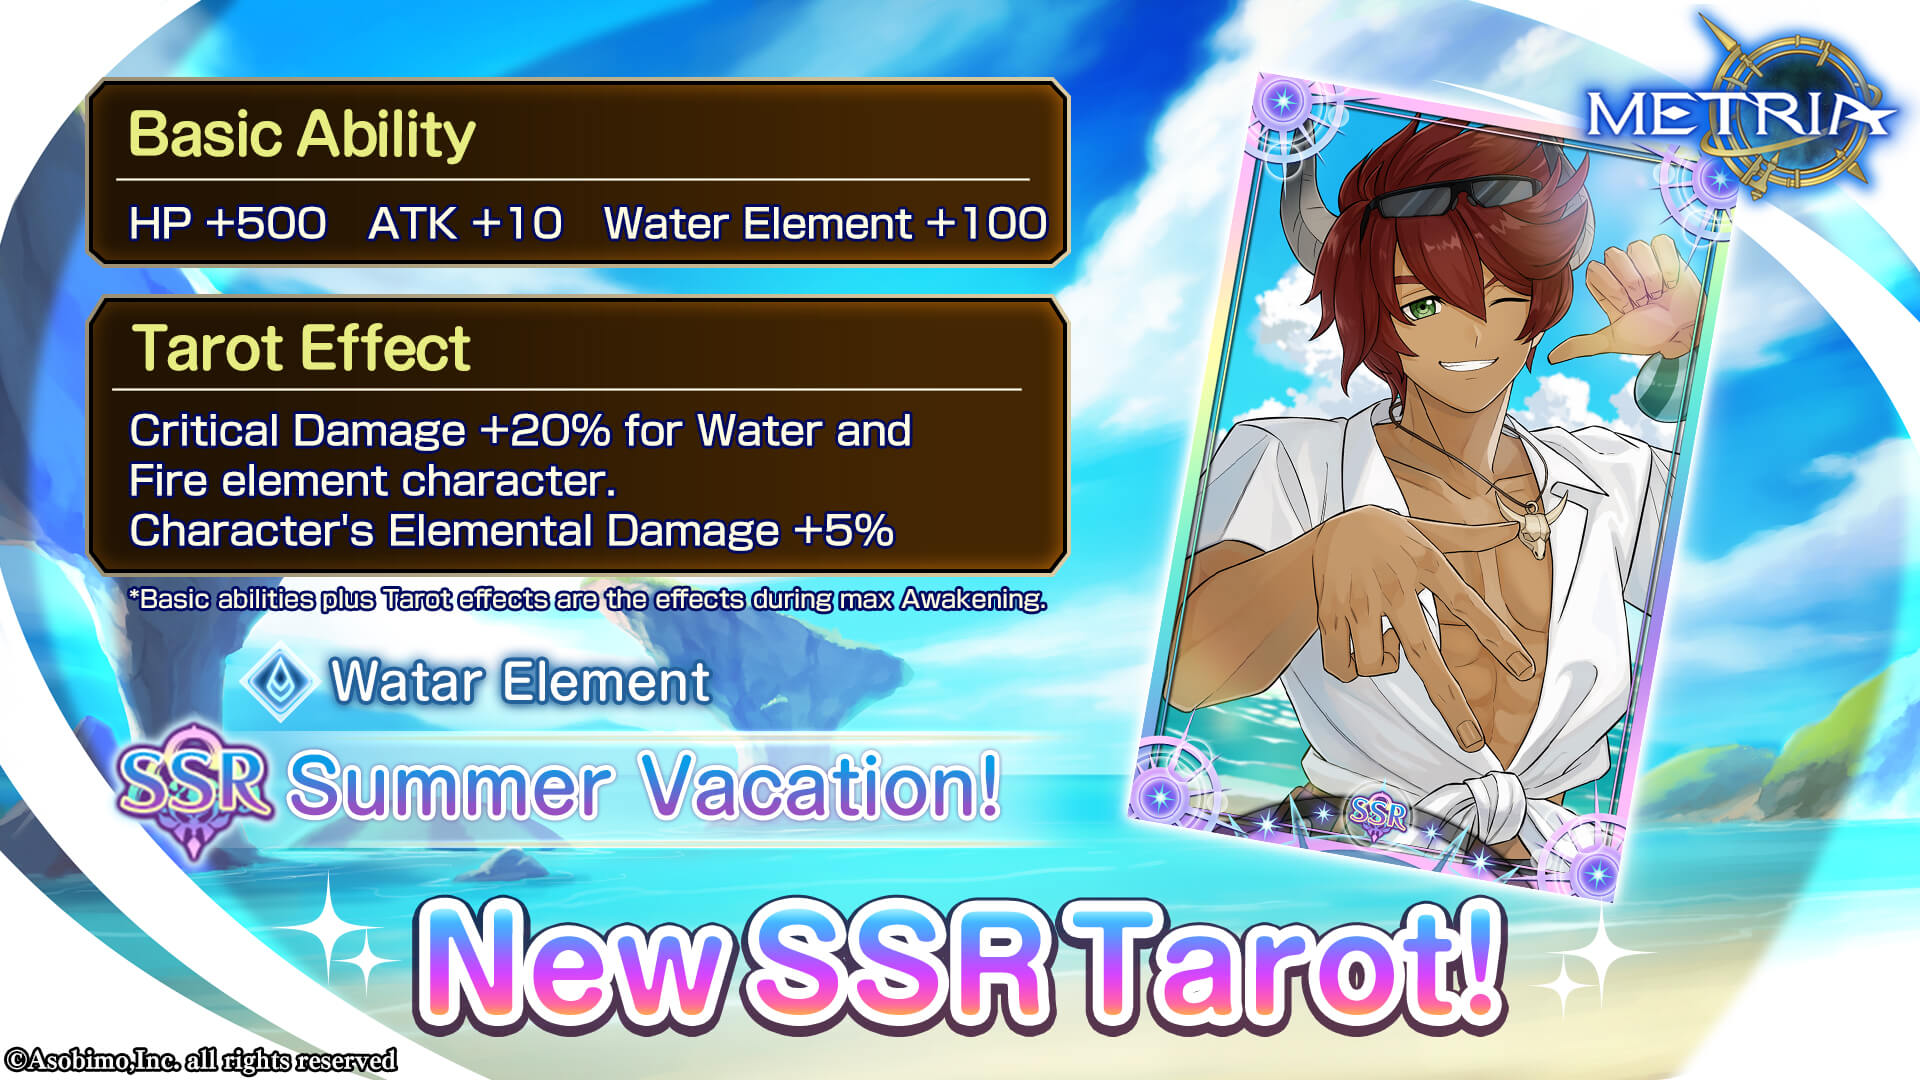 Water Element New SSR Tarot: "Summer Vacation!" Available for Purchase!